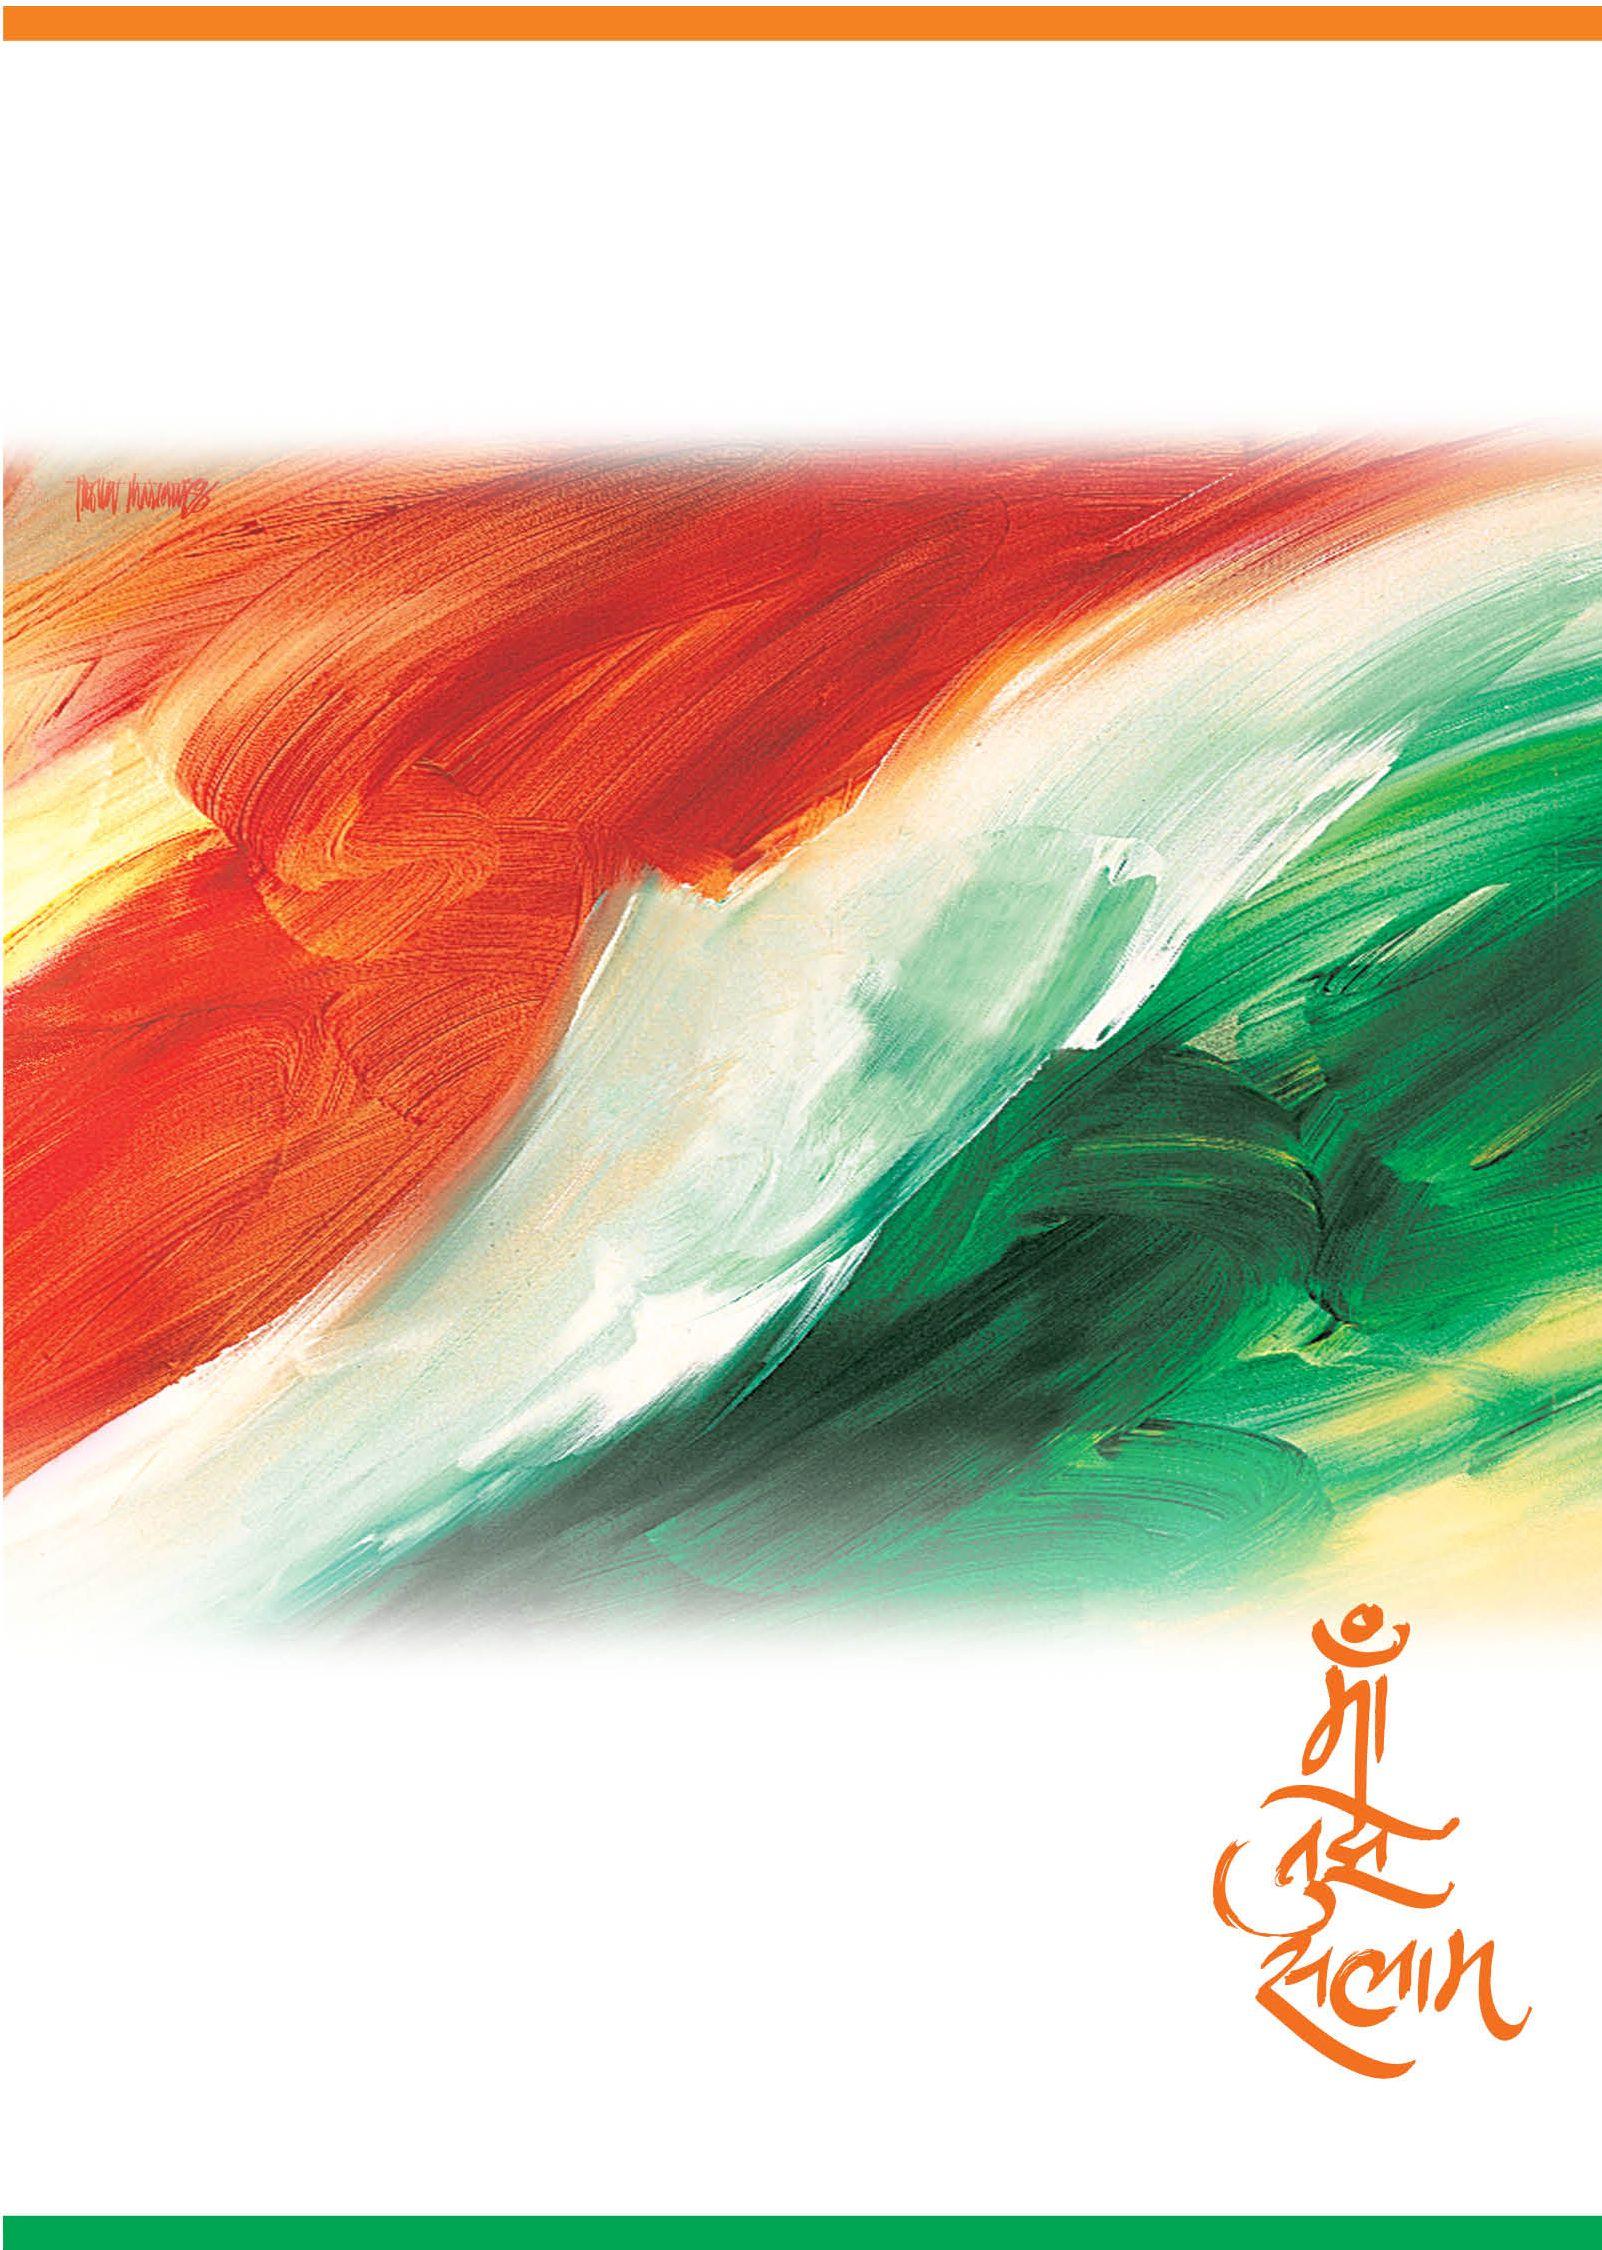 Artistically portraying the Indian National flag colours- Jai Hind!. Indian flag wallpaper, Indian flag colors, Indian flag